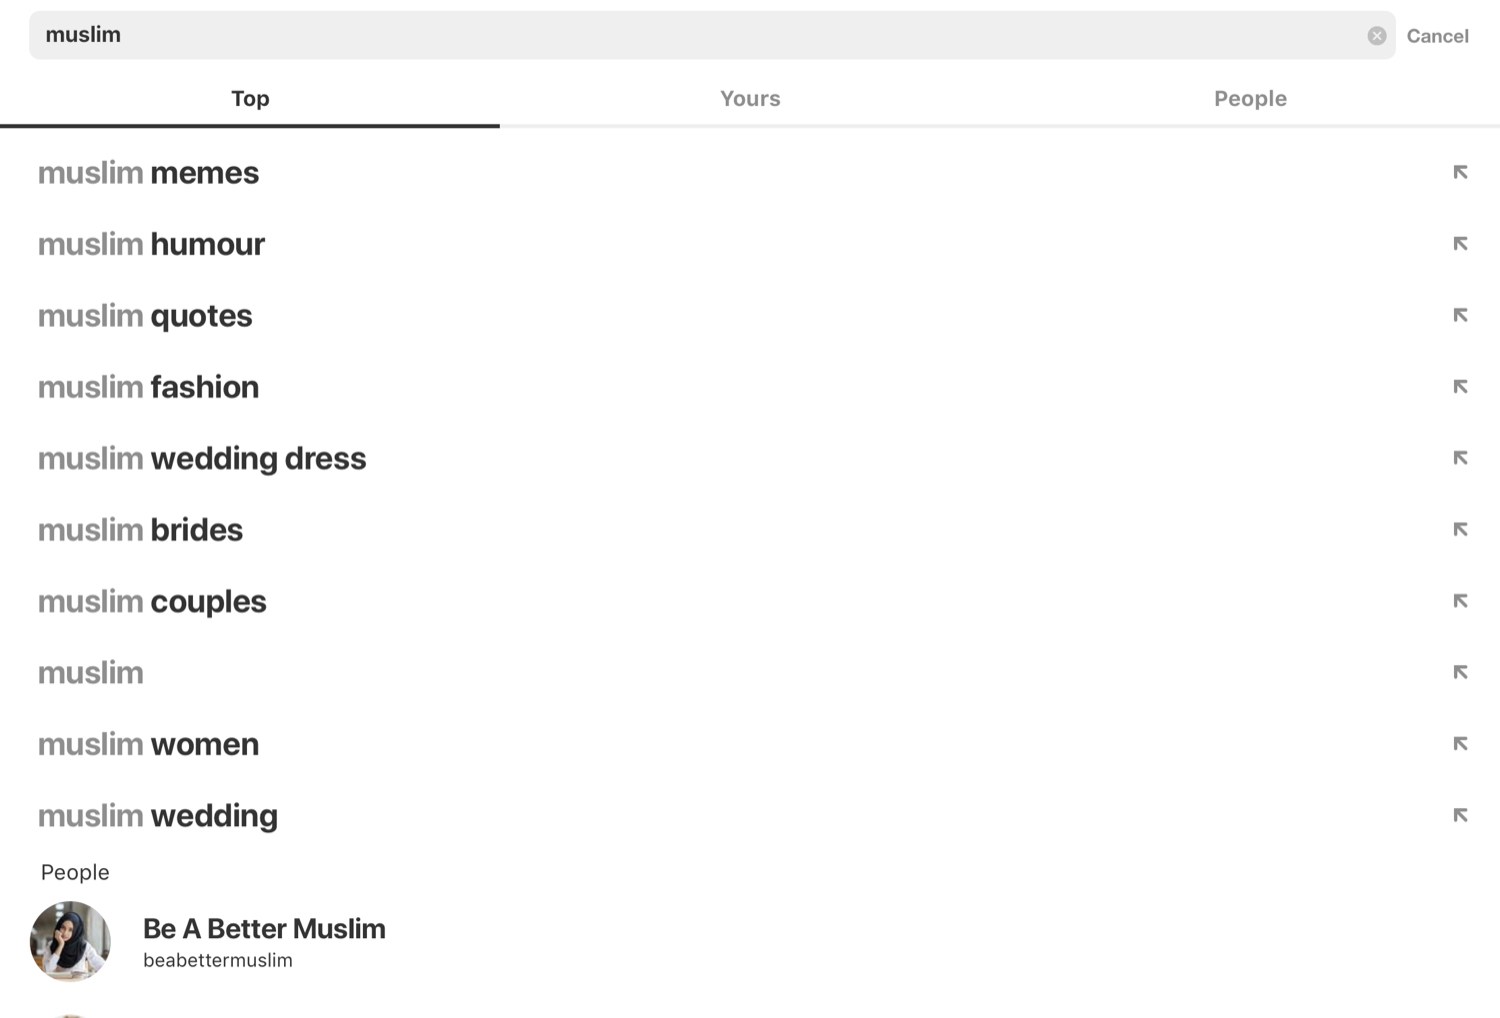 Pinterest auto-complete suggestions for the term “Muslim.”